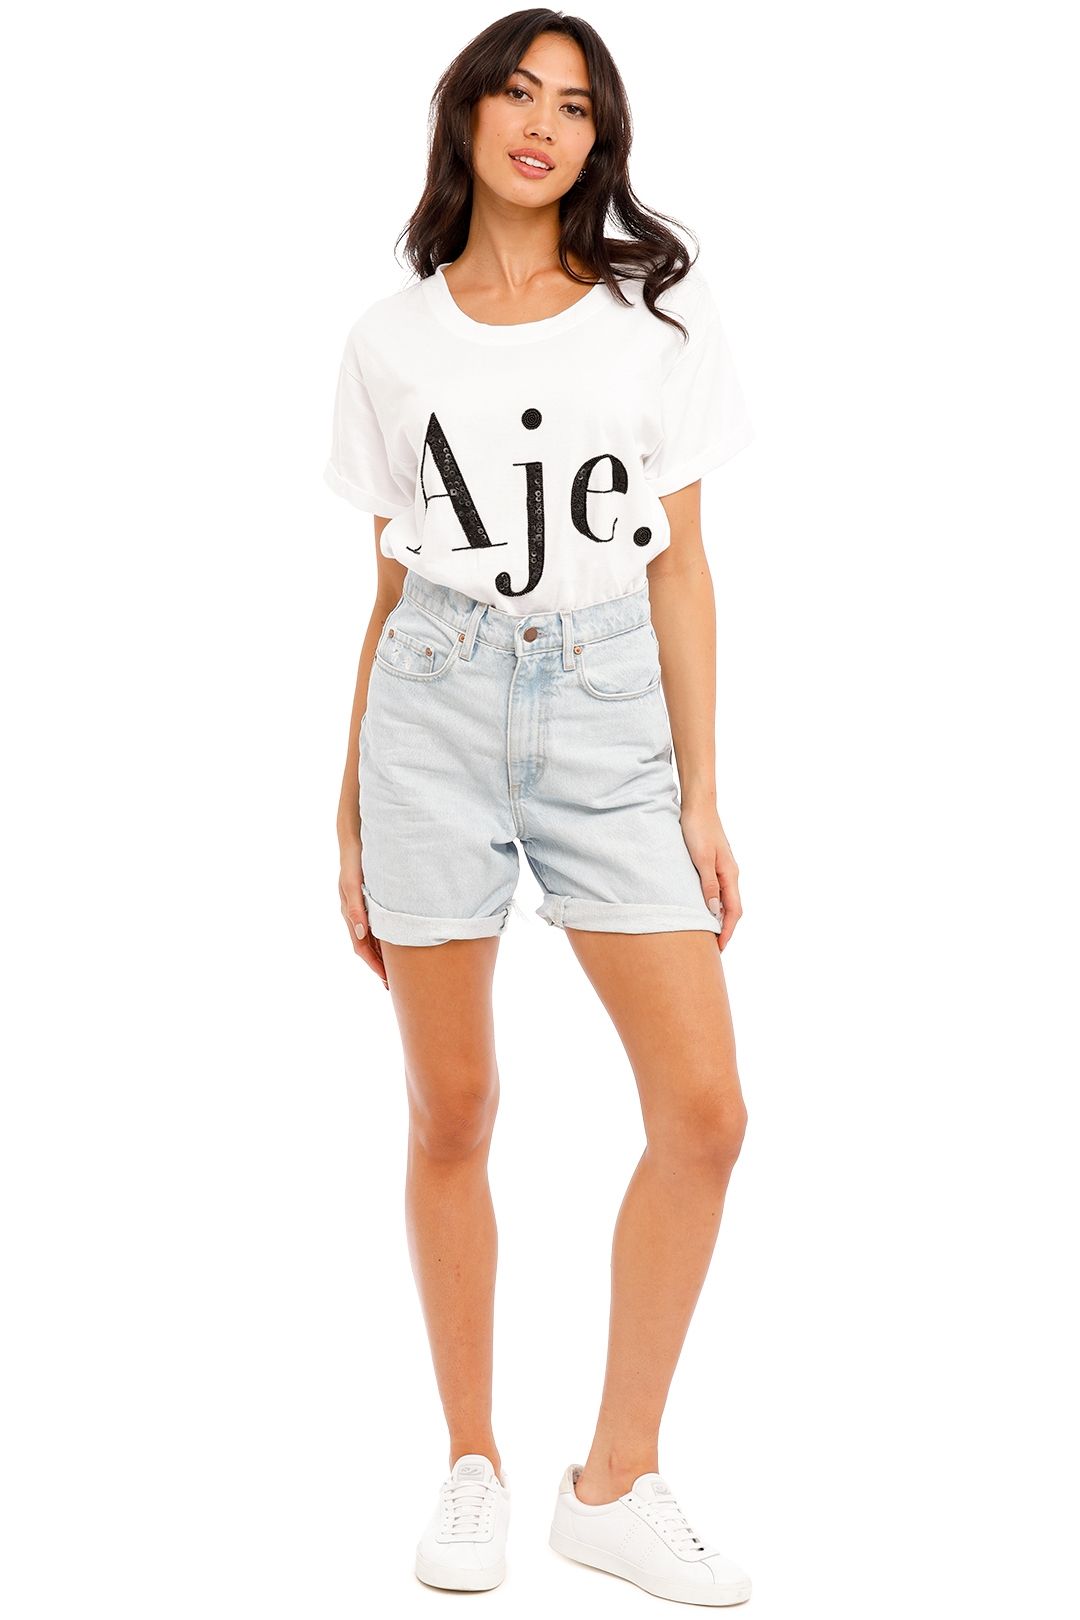 Aje Logo Tee in Sequin relaxed